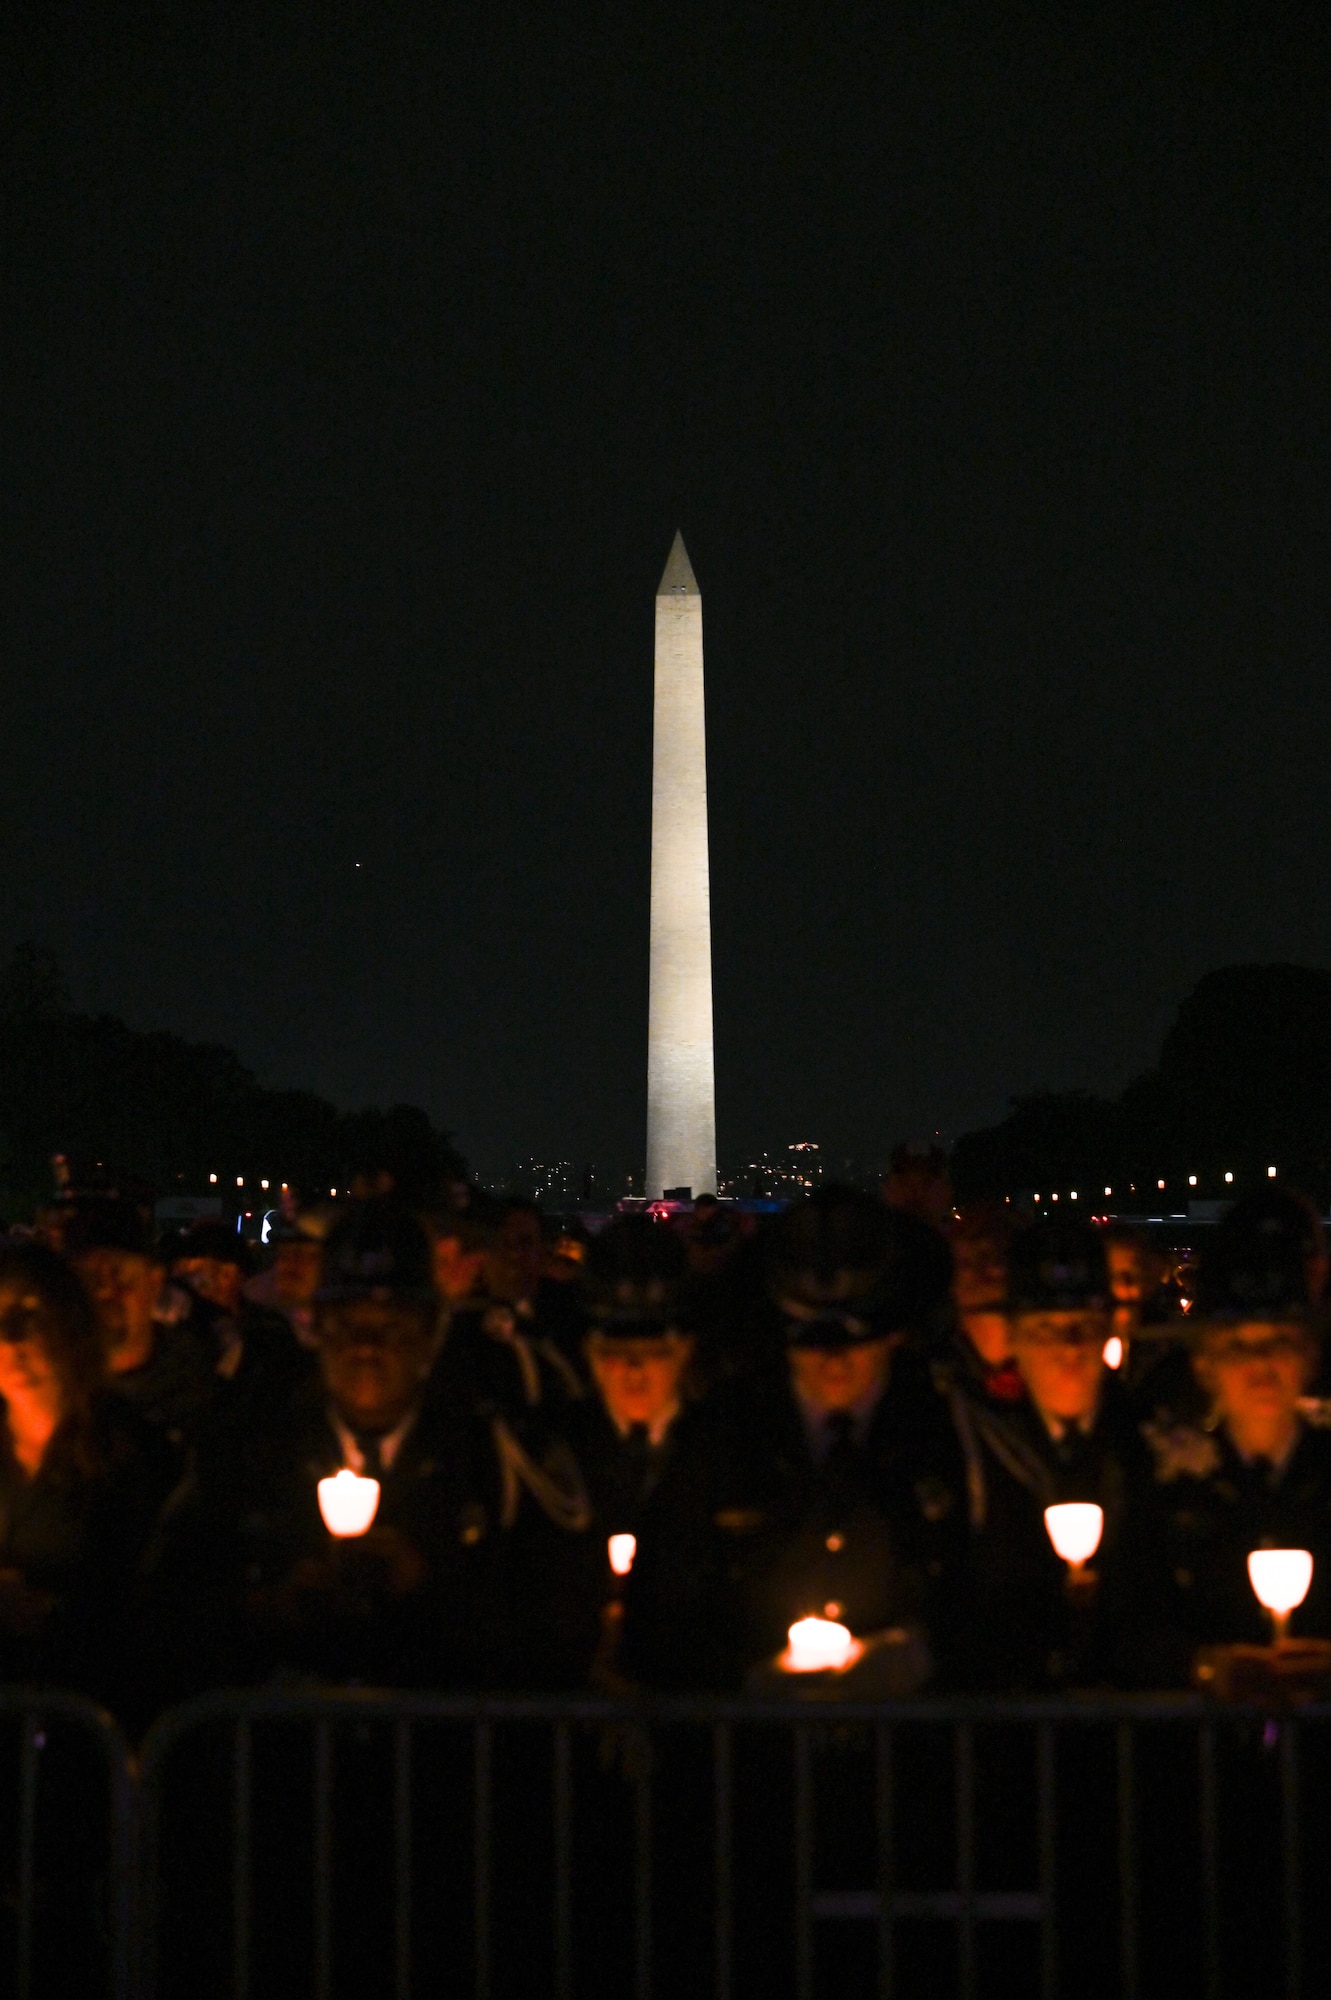 Law enforcement officers from across the country hold candles to pay tribute to law enforcement officers who were killed in the line of duty during a candlelight vigil on the National Mall in Washington, D.C. May 13, 2023. After a long process of gathering the information, routing, and submitting the two fallen Airmen, they were finally approved to be added to the memorial. Their names were then engraved on the memorial and read at the 35th Annual Candlelight Vigil during National Police Week.  (U.S. Air Force photo by Abigail Meyer)